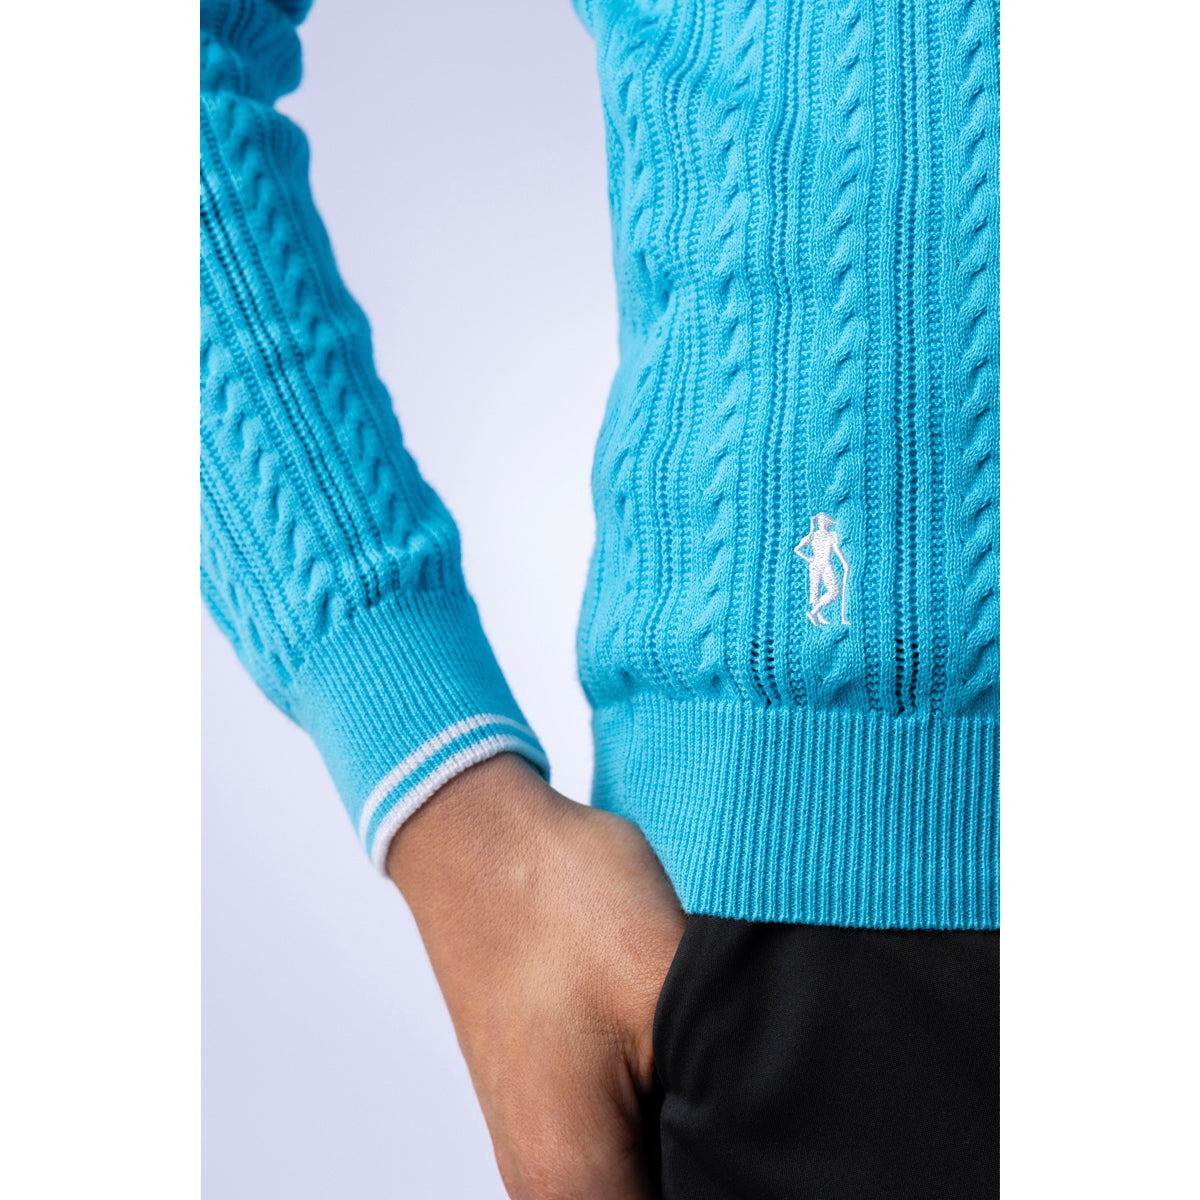 Glenmuir Ladies Cable Knit Sweater in Aqua & White